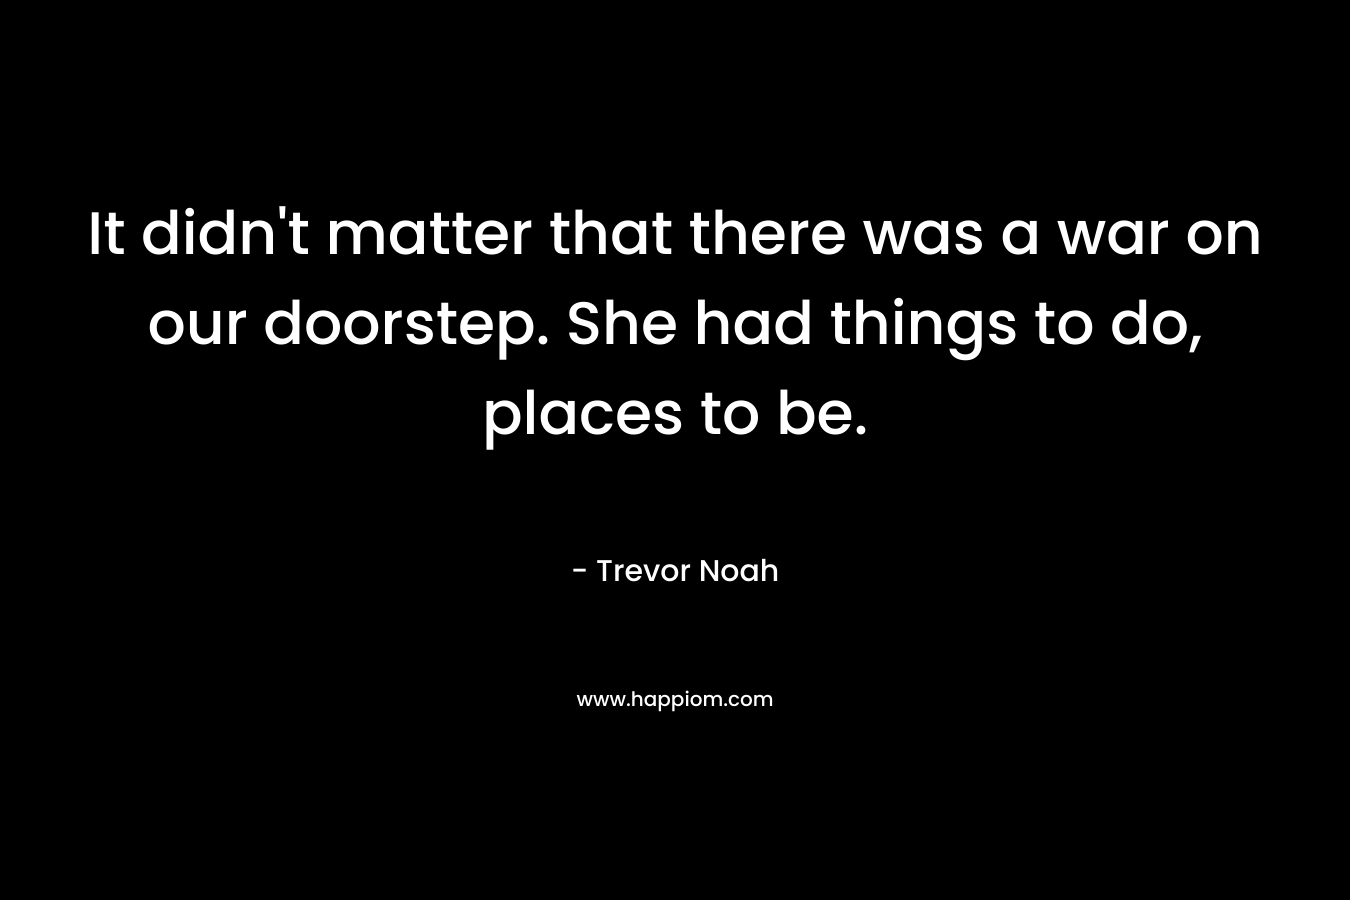 It didn’t matter that there was a war on our doorstep. She had things to do, places to be. – Trevor Noah